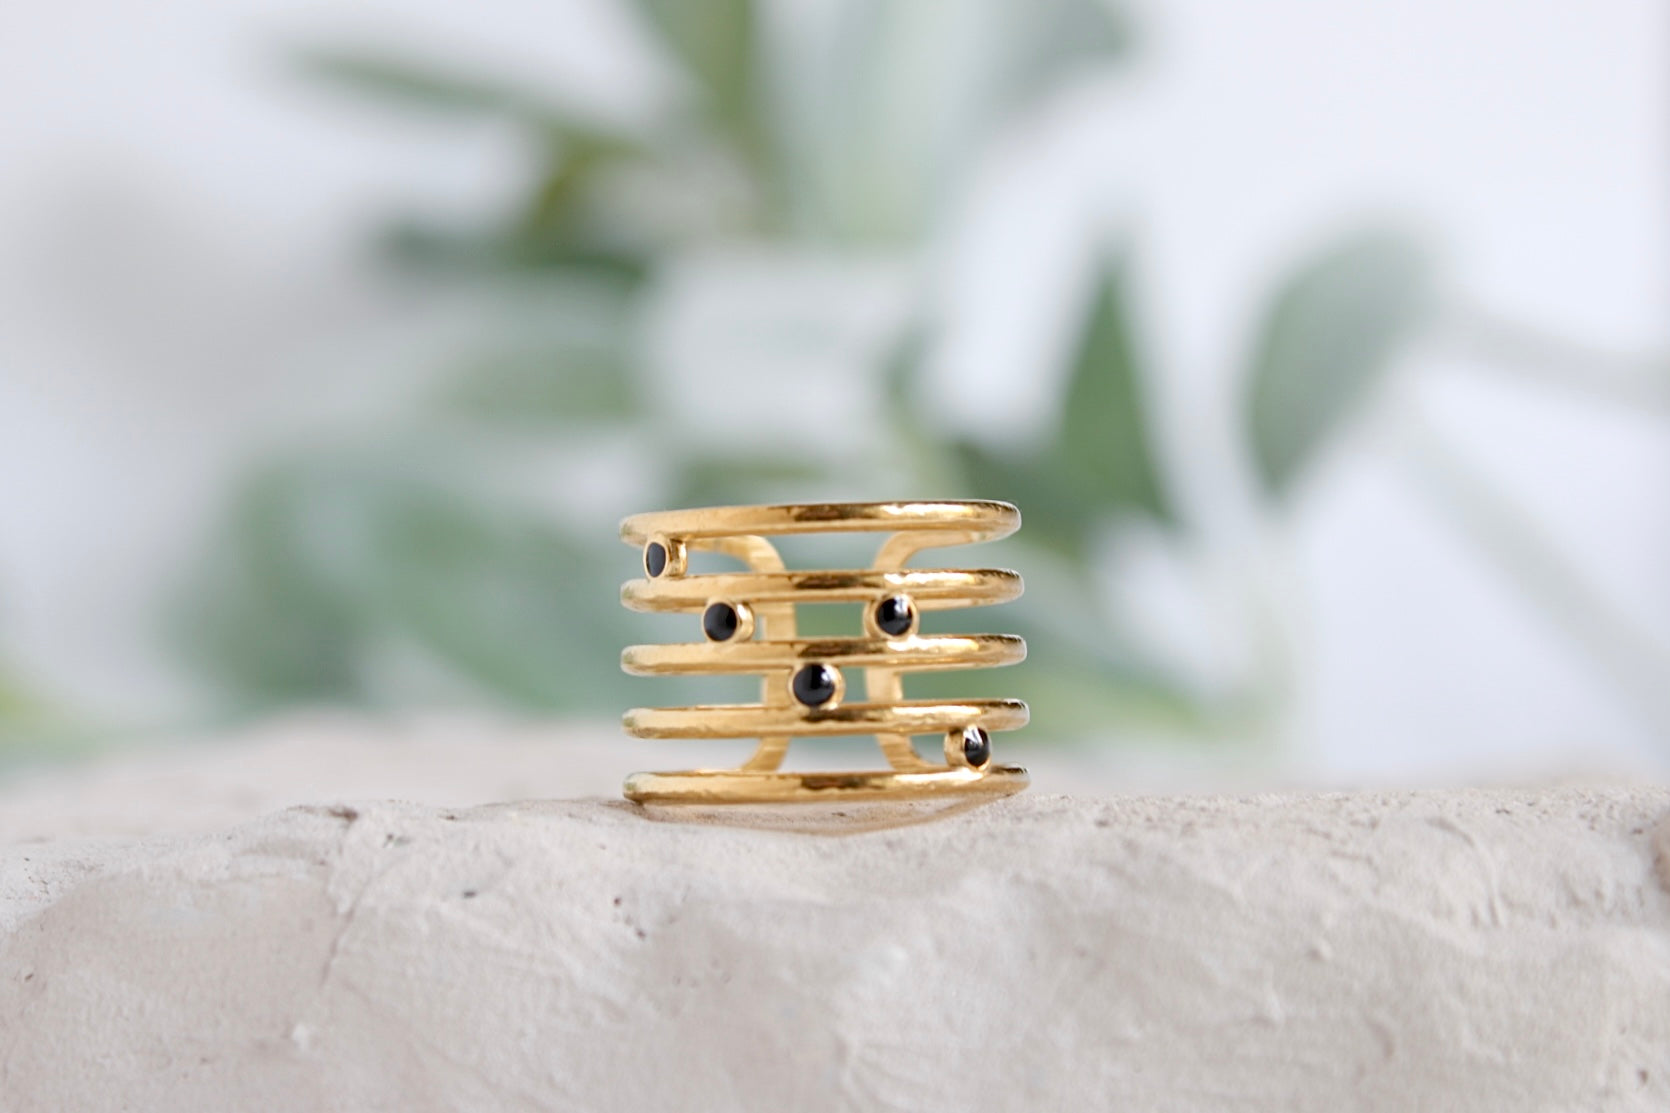 Gold plated stainless steel adjustable ring